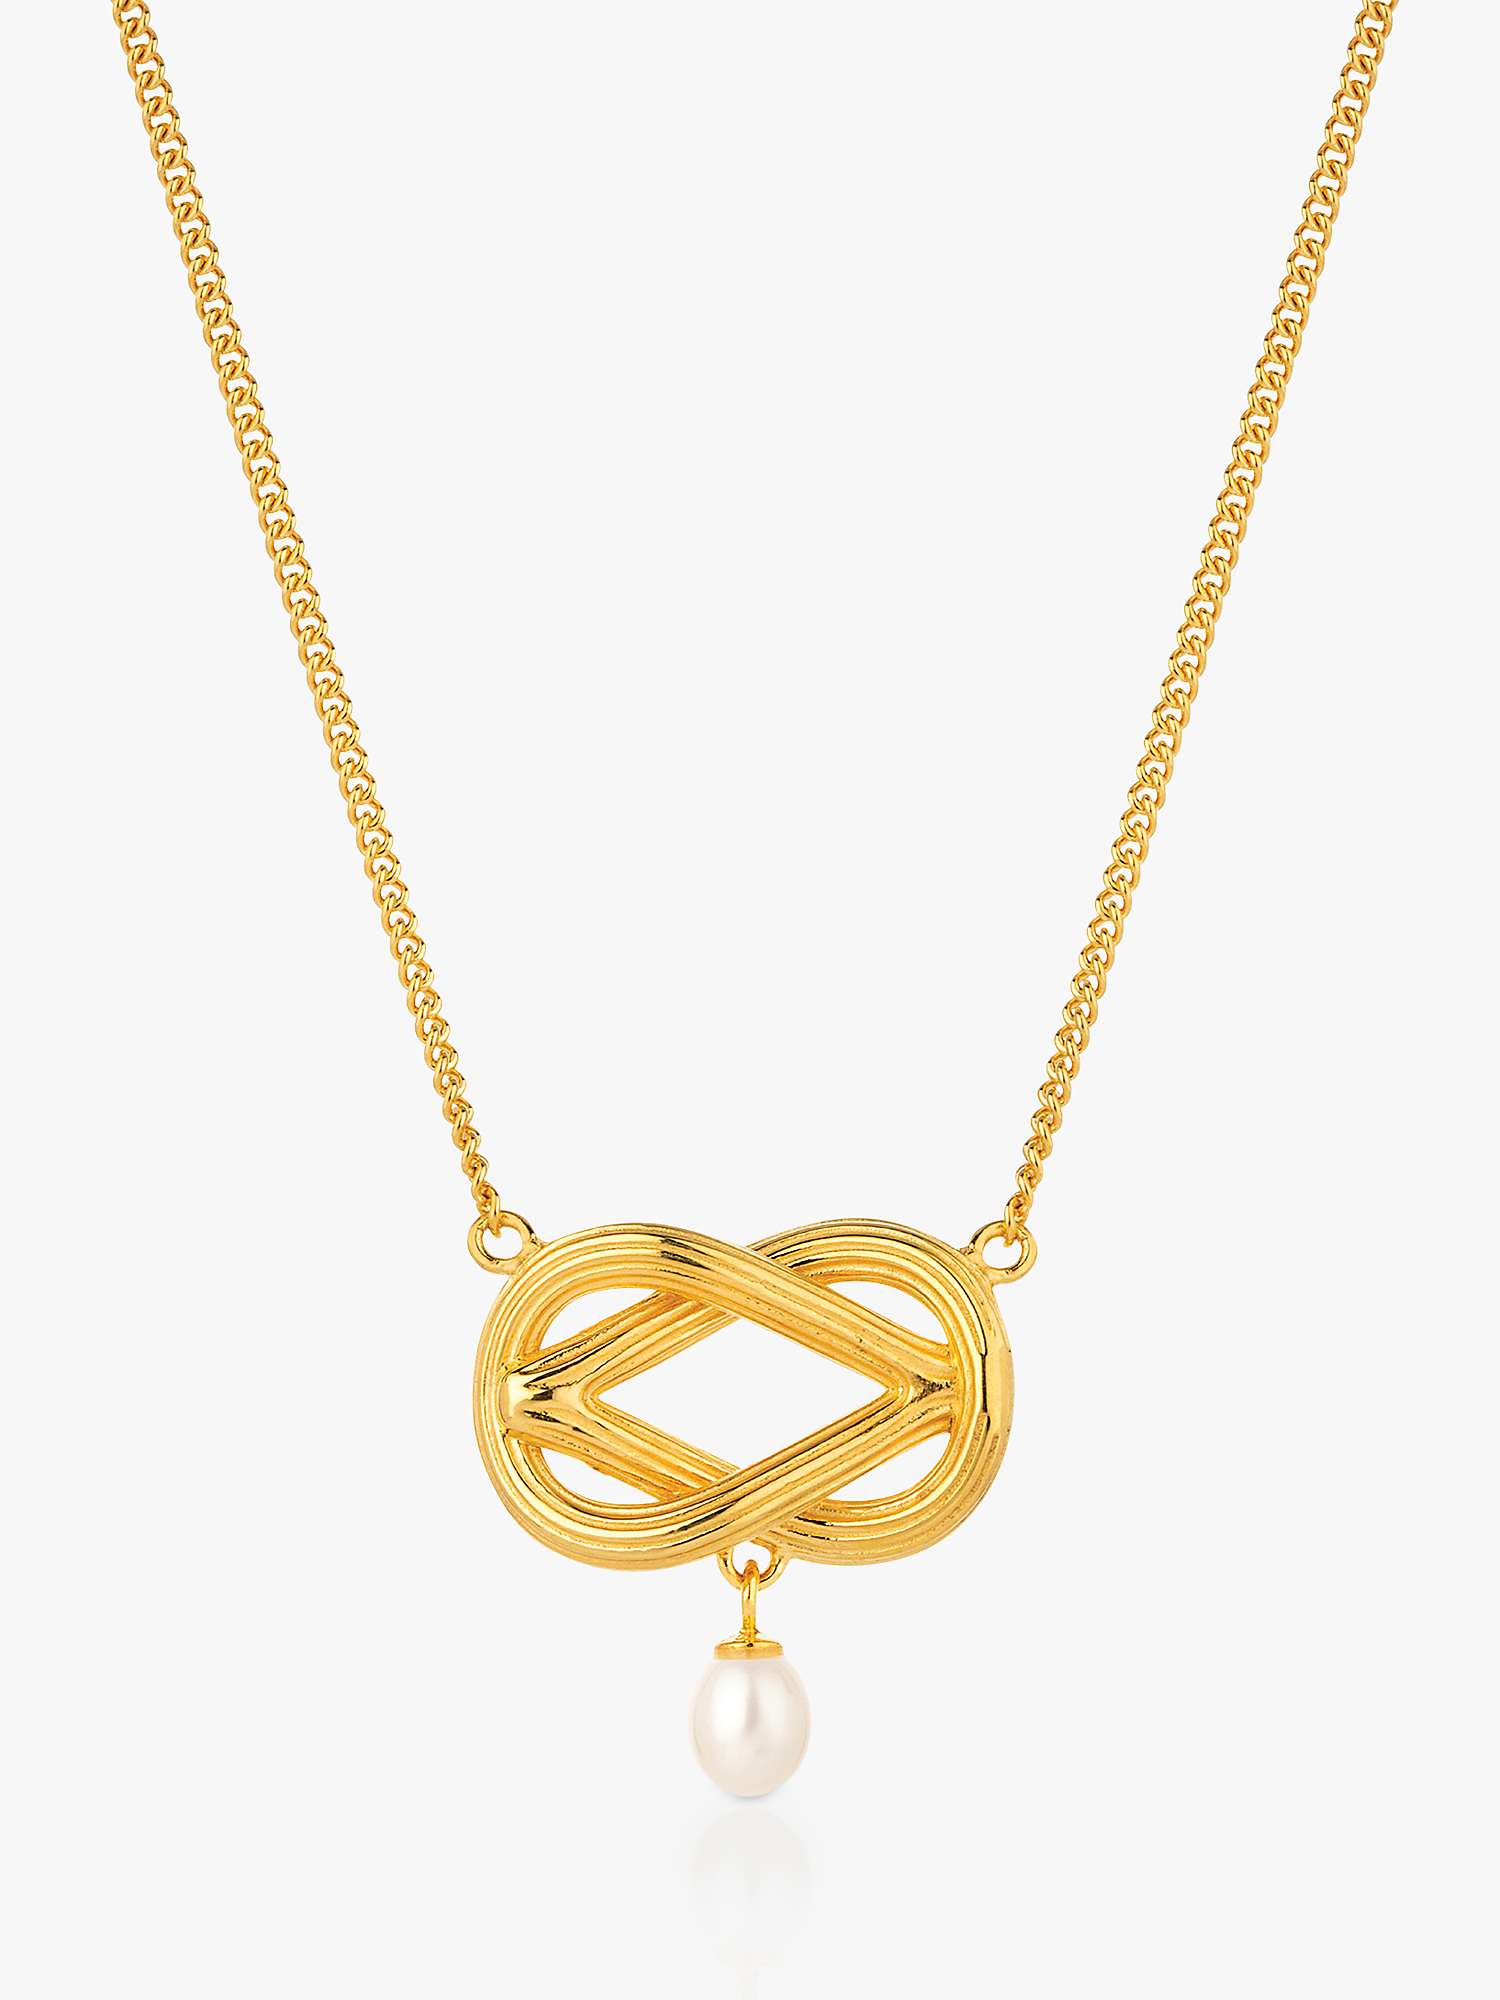 Buy Claudia Bradby Love Knot Freshwater Pearl Pendant Necklace, Gold Online at johnlewis.com